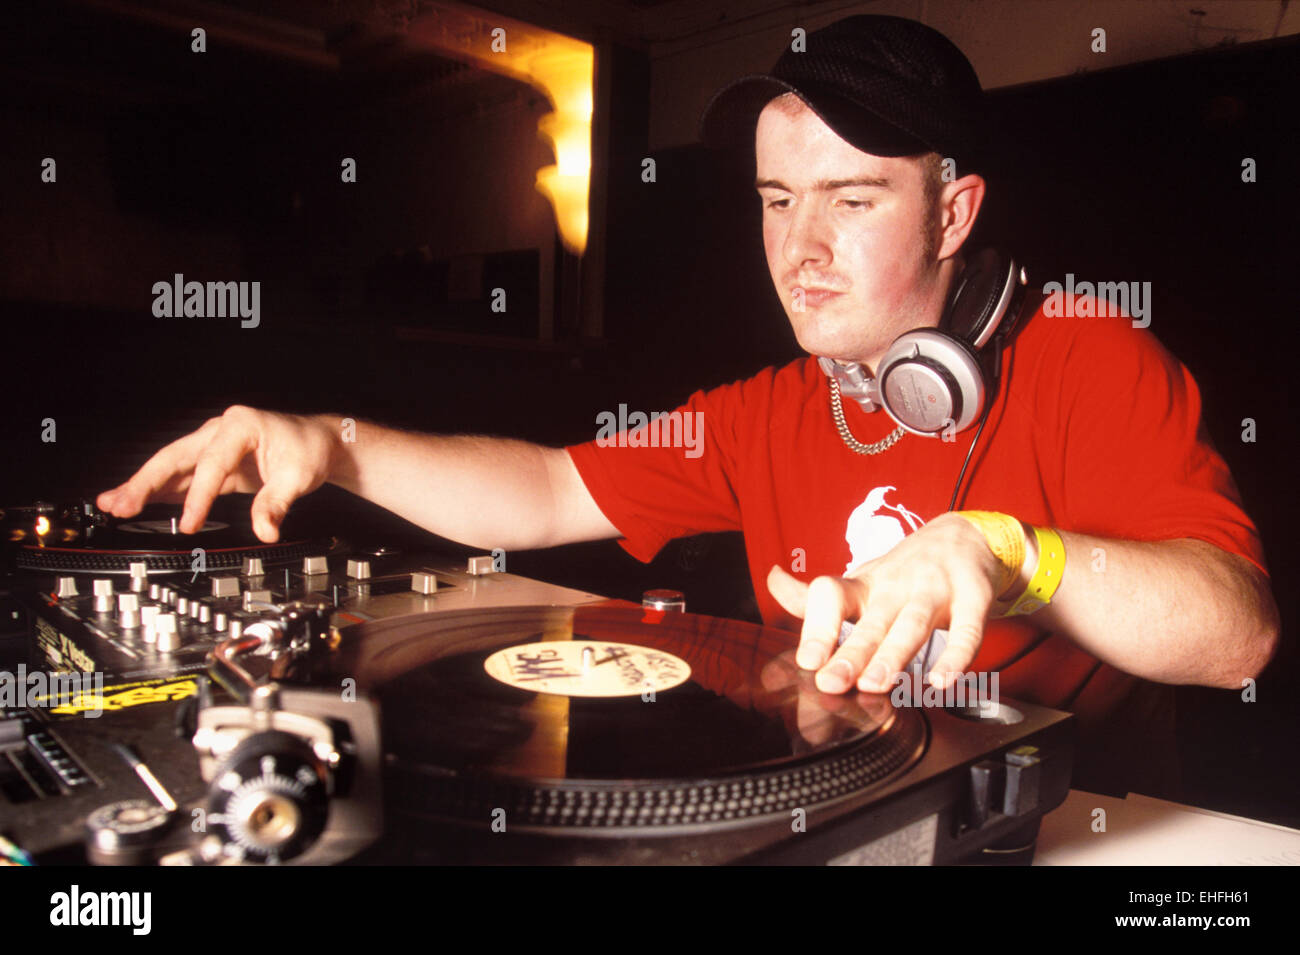 DJ Plus 1 scratching at Clash Of The Titans at Brixton Academy London. Stock Photo